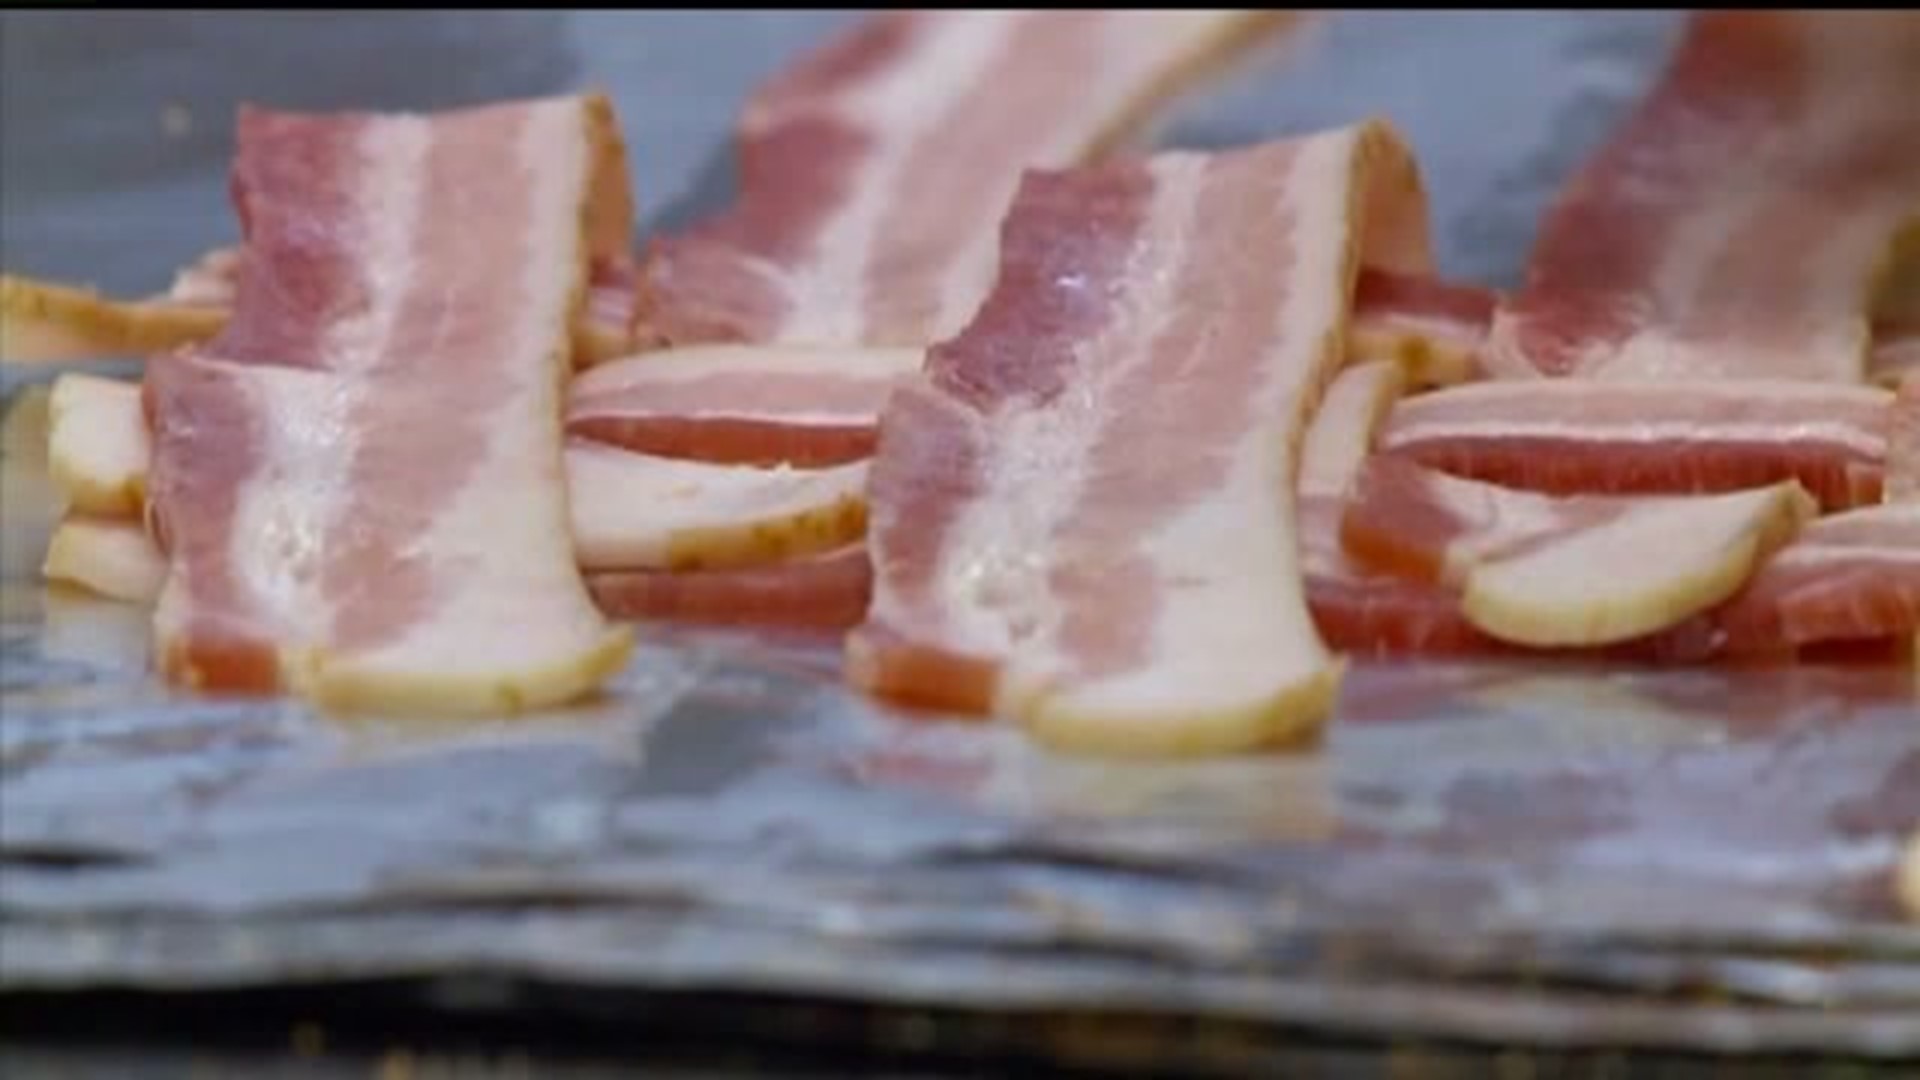 Iowa pig farmer responds to report claiming processed meats cause cancer